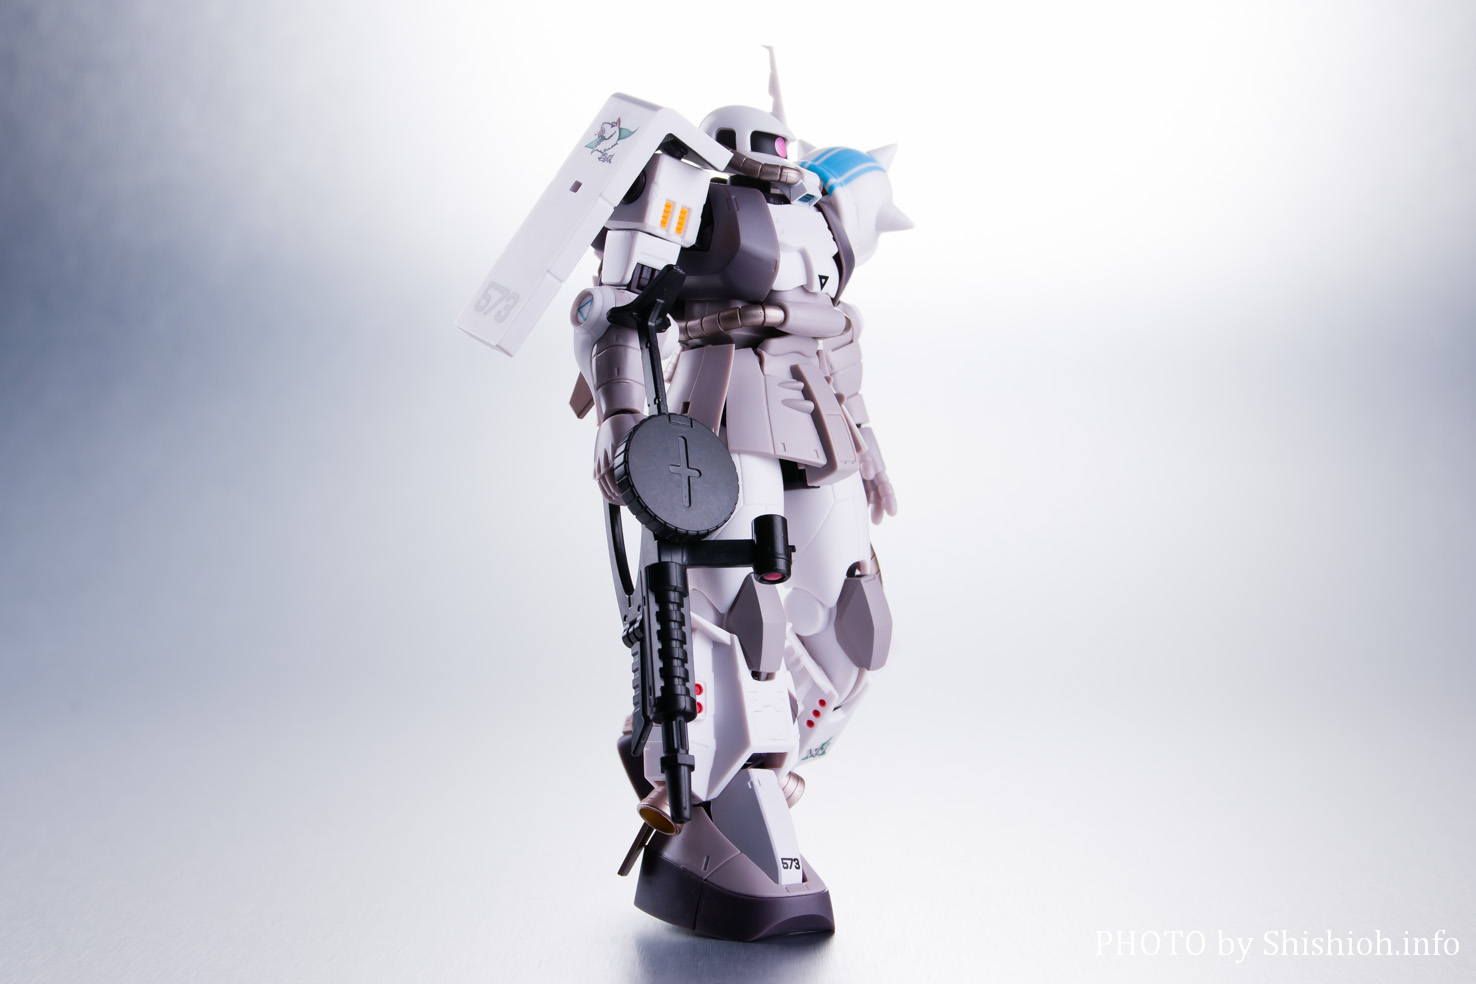 ROBOT魂 ＜SIDE MS＞ MS-06R-1A シン・マツナガ専用高機動型ザクII ver. A.N.I.M.E.